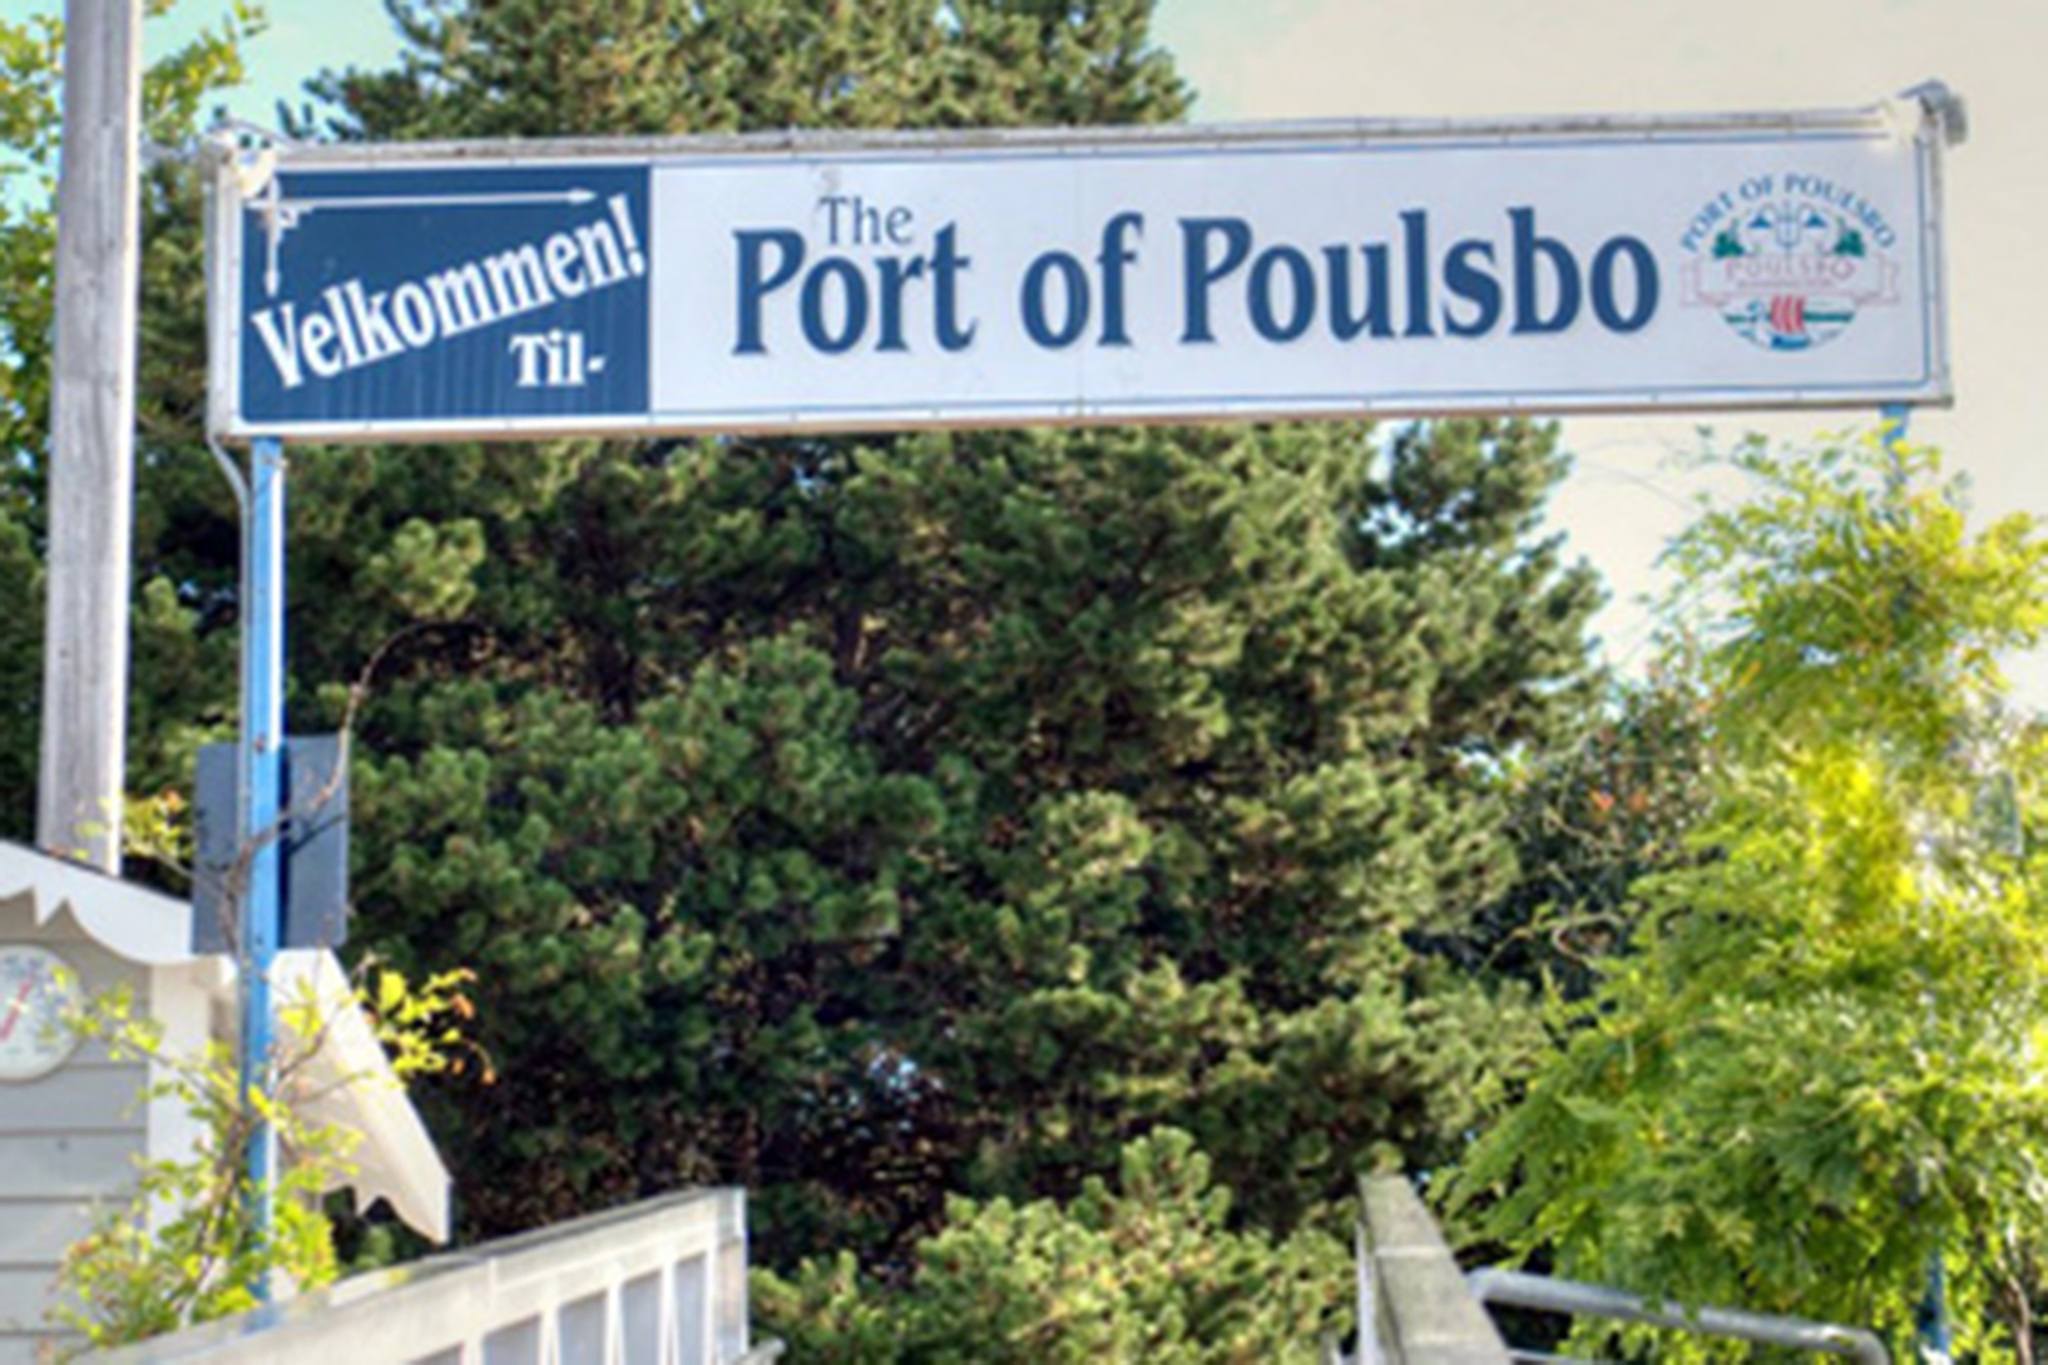 Poulsbo port commissioner: Revenue would be used to replace creosoted pilings, improve other facilities